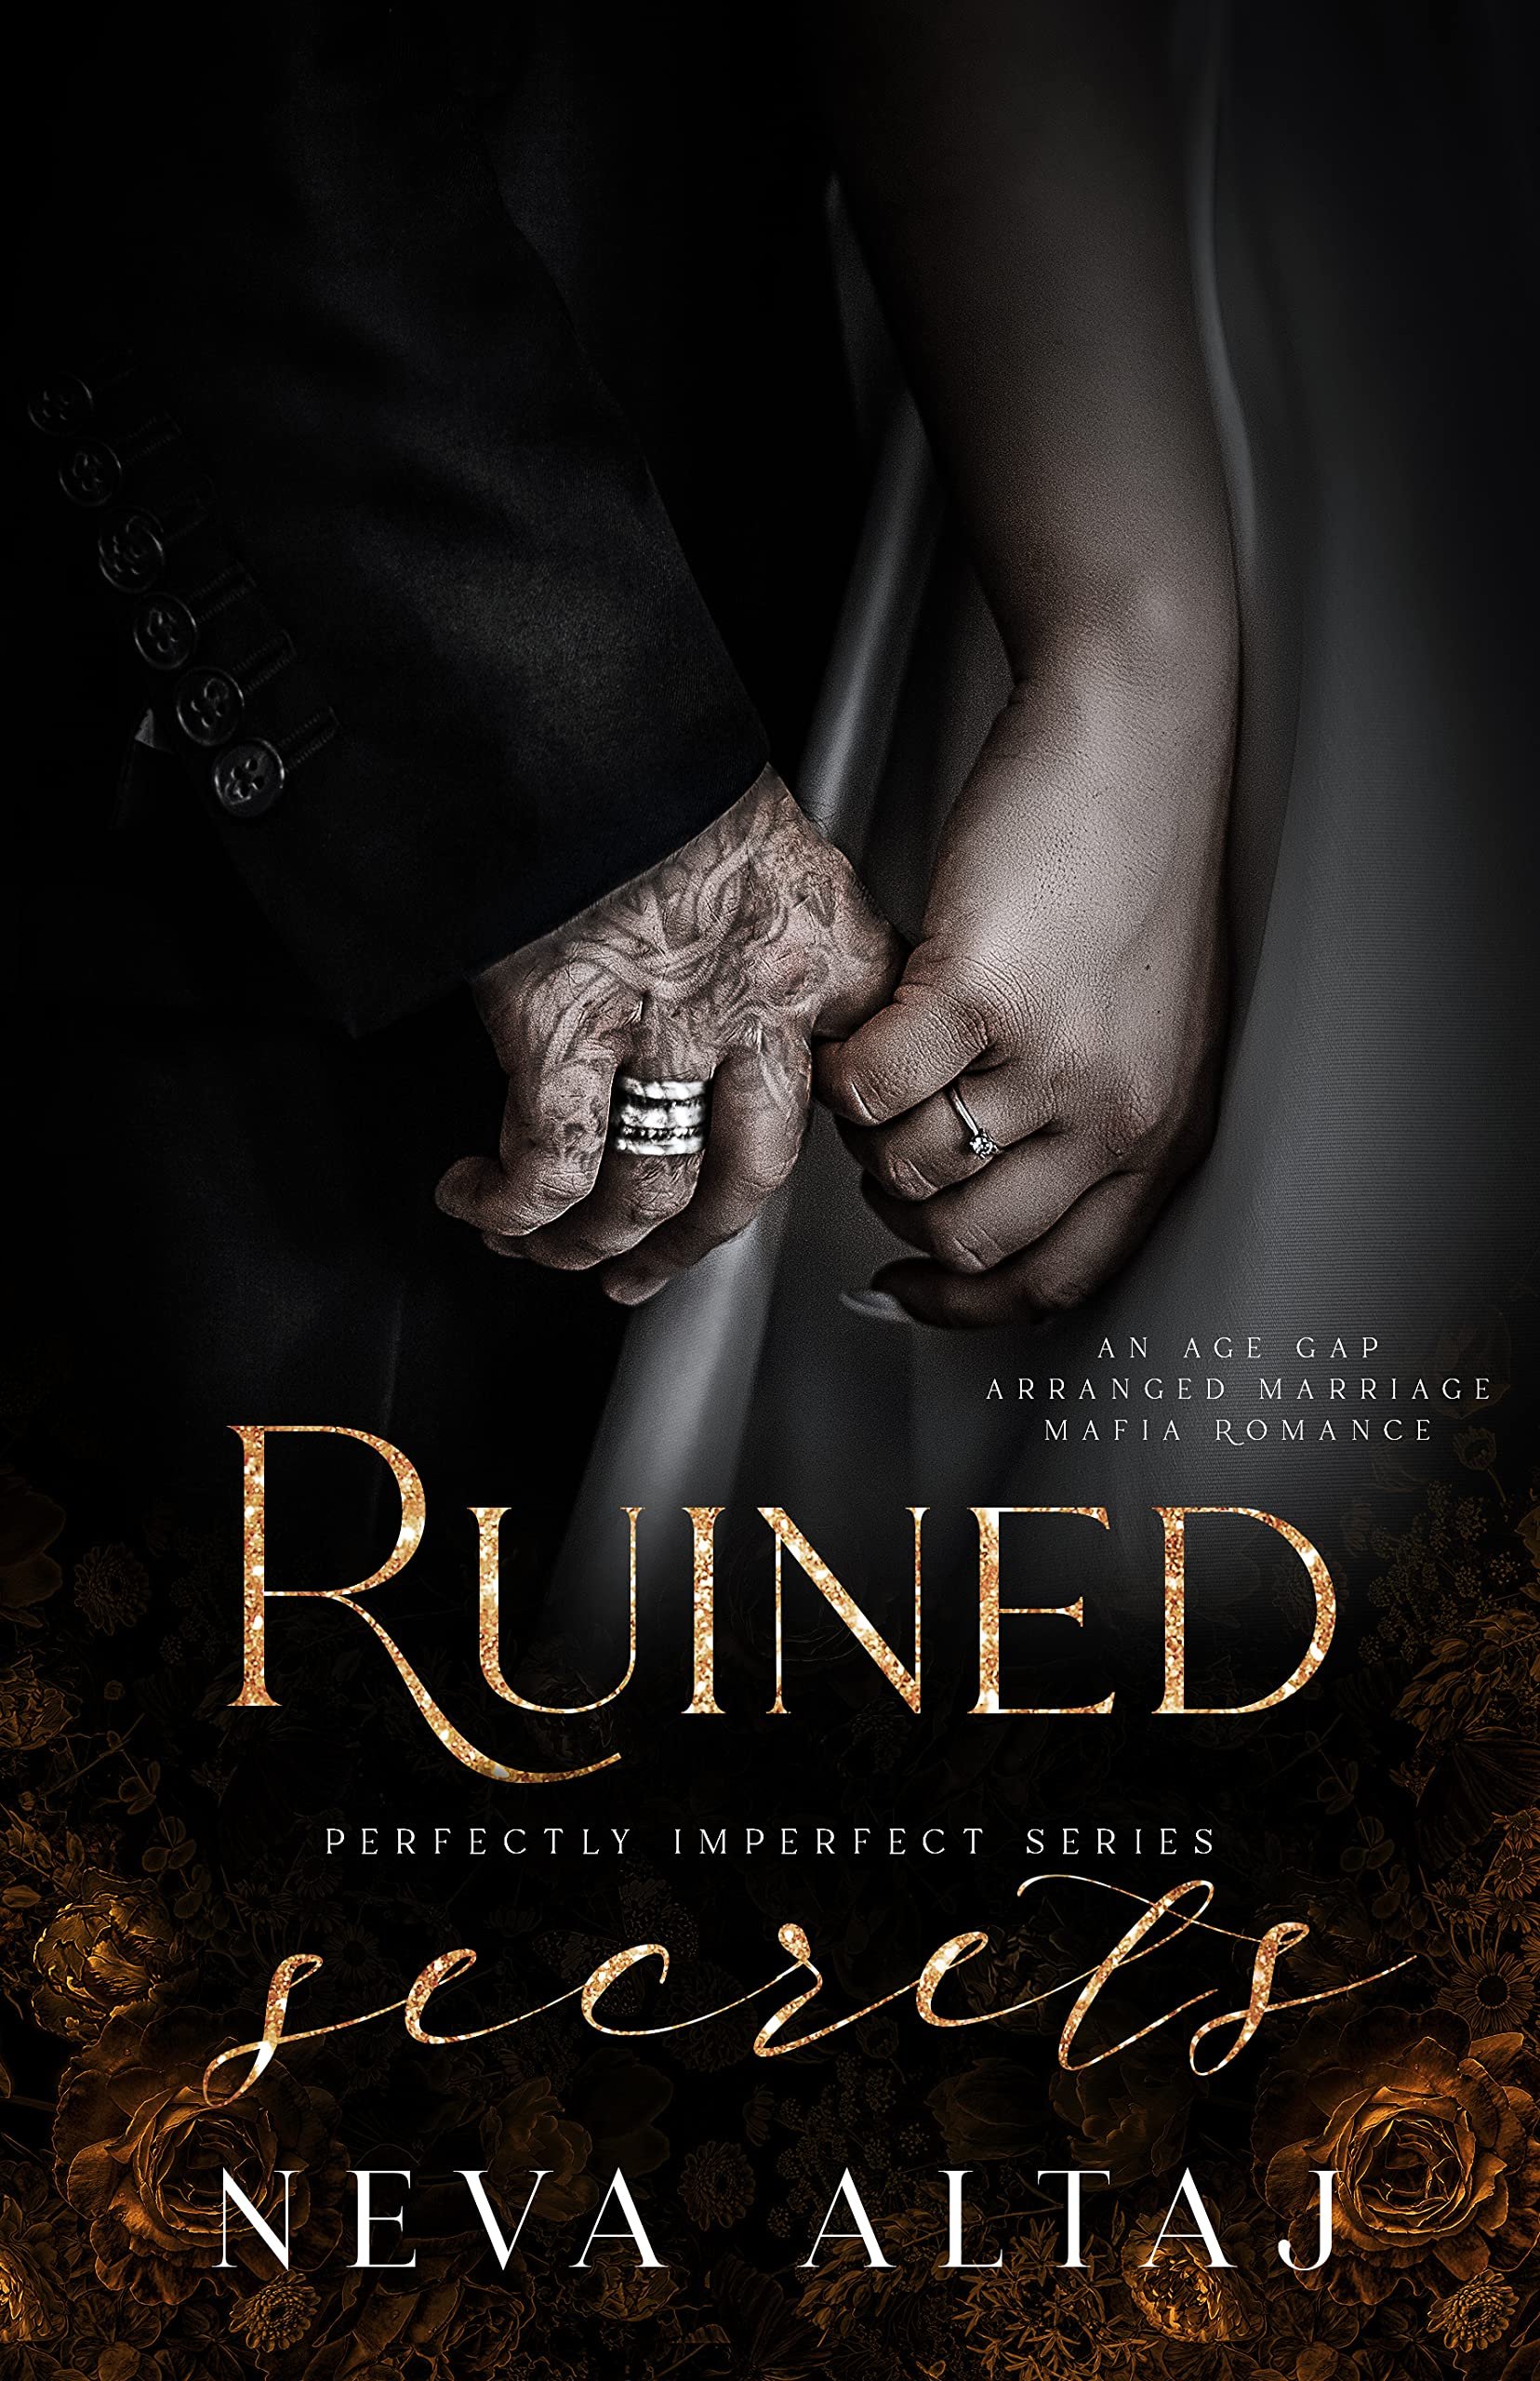 Ruined Secrets: An Age Gap Arranged Marriage Mafia Romance (Perfectly Imperfect Book 4) Cover